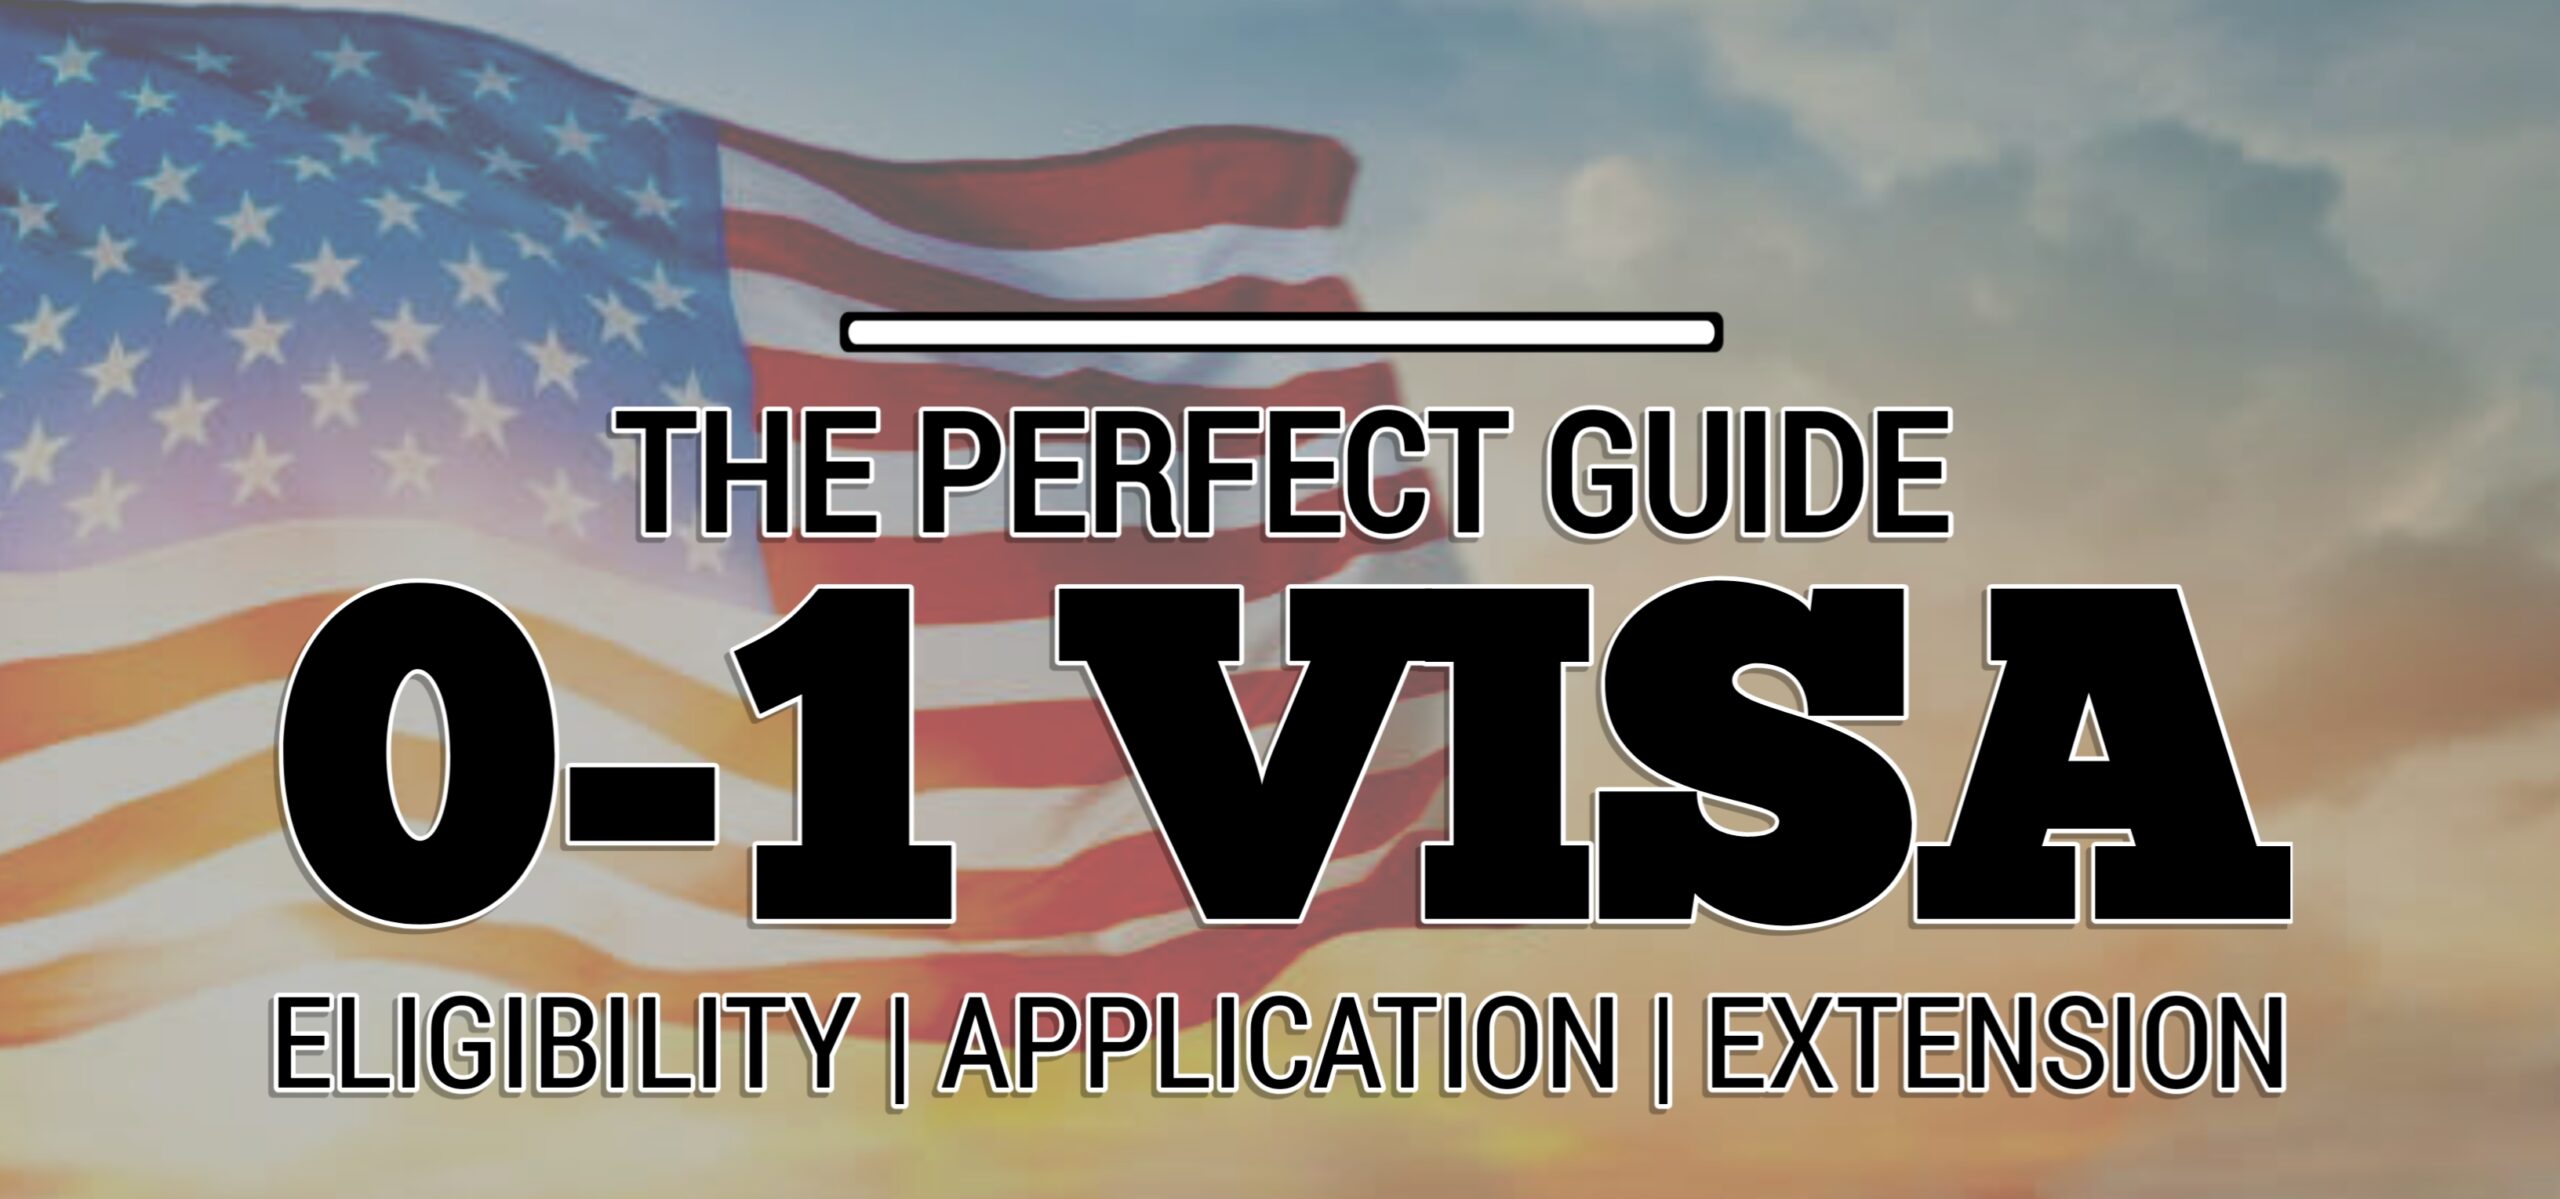 THE PERFECT GUIDE FOR 0-1 VISA